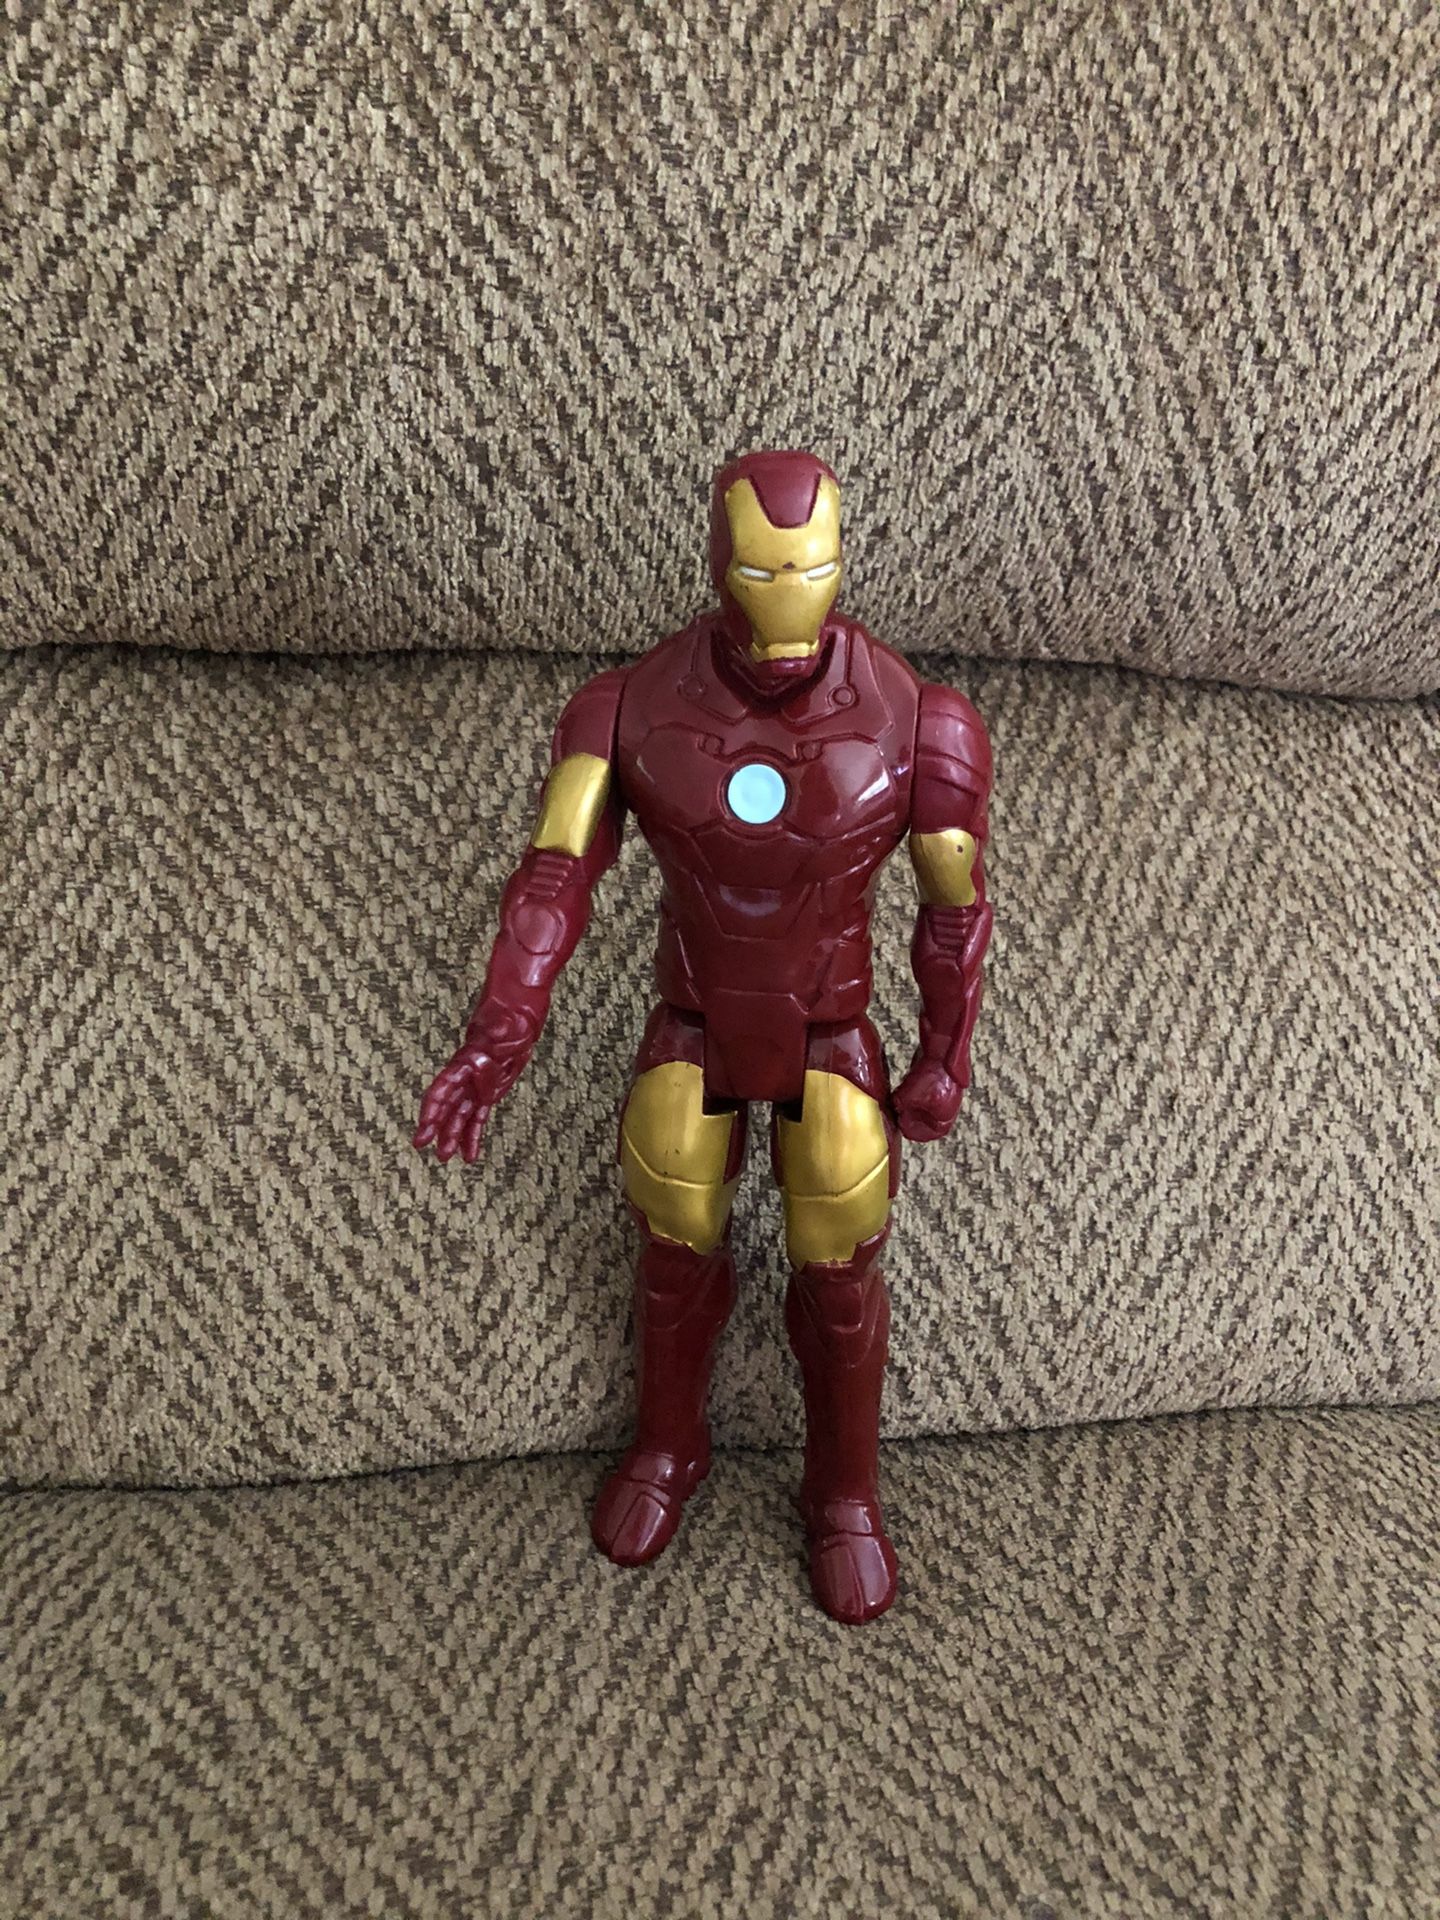 Marvel Avengers Iron man approximately 11 inches tall